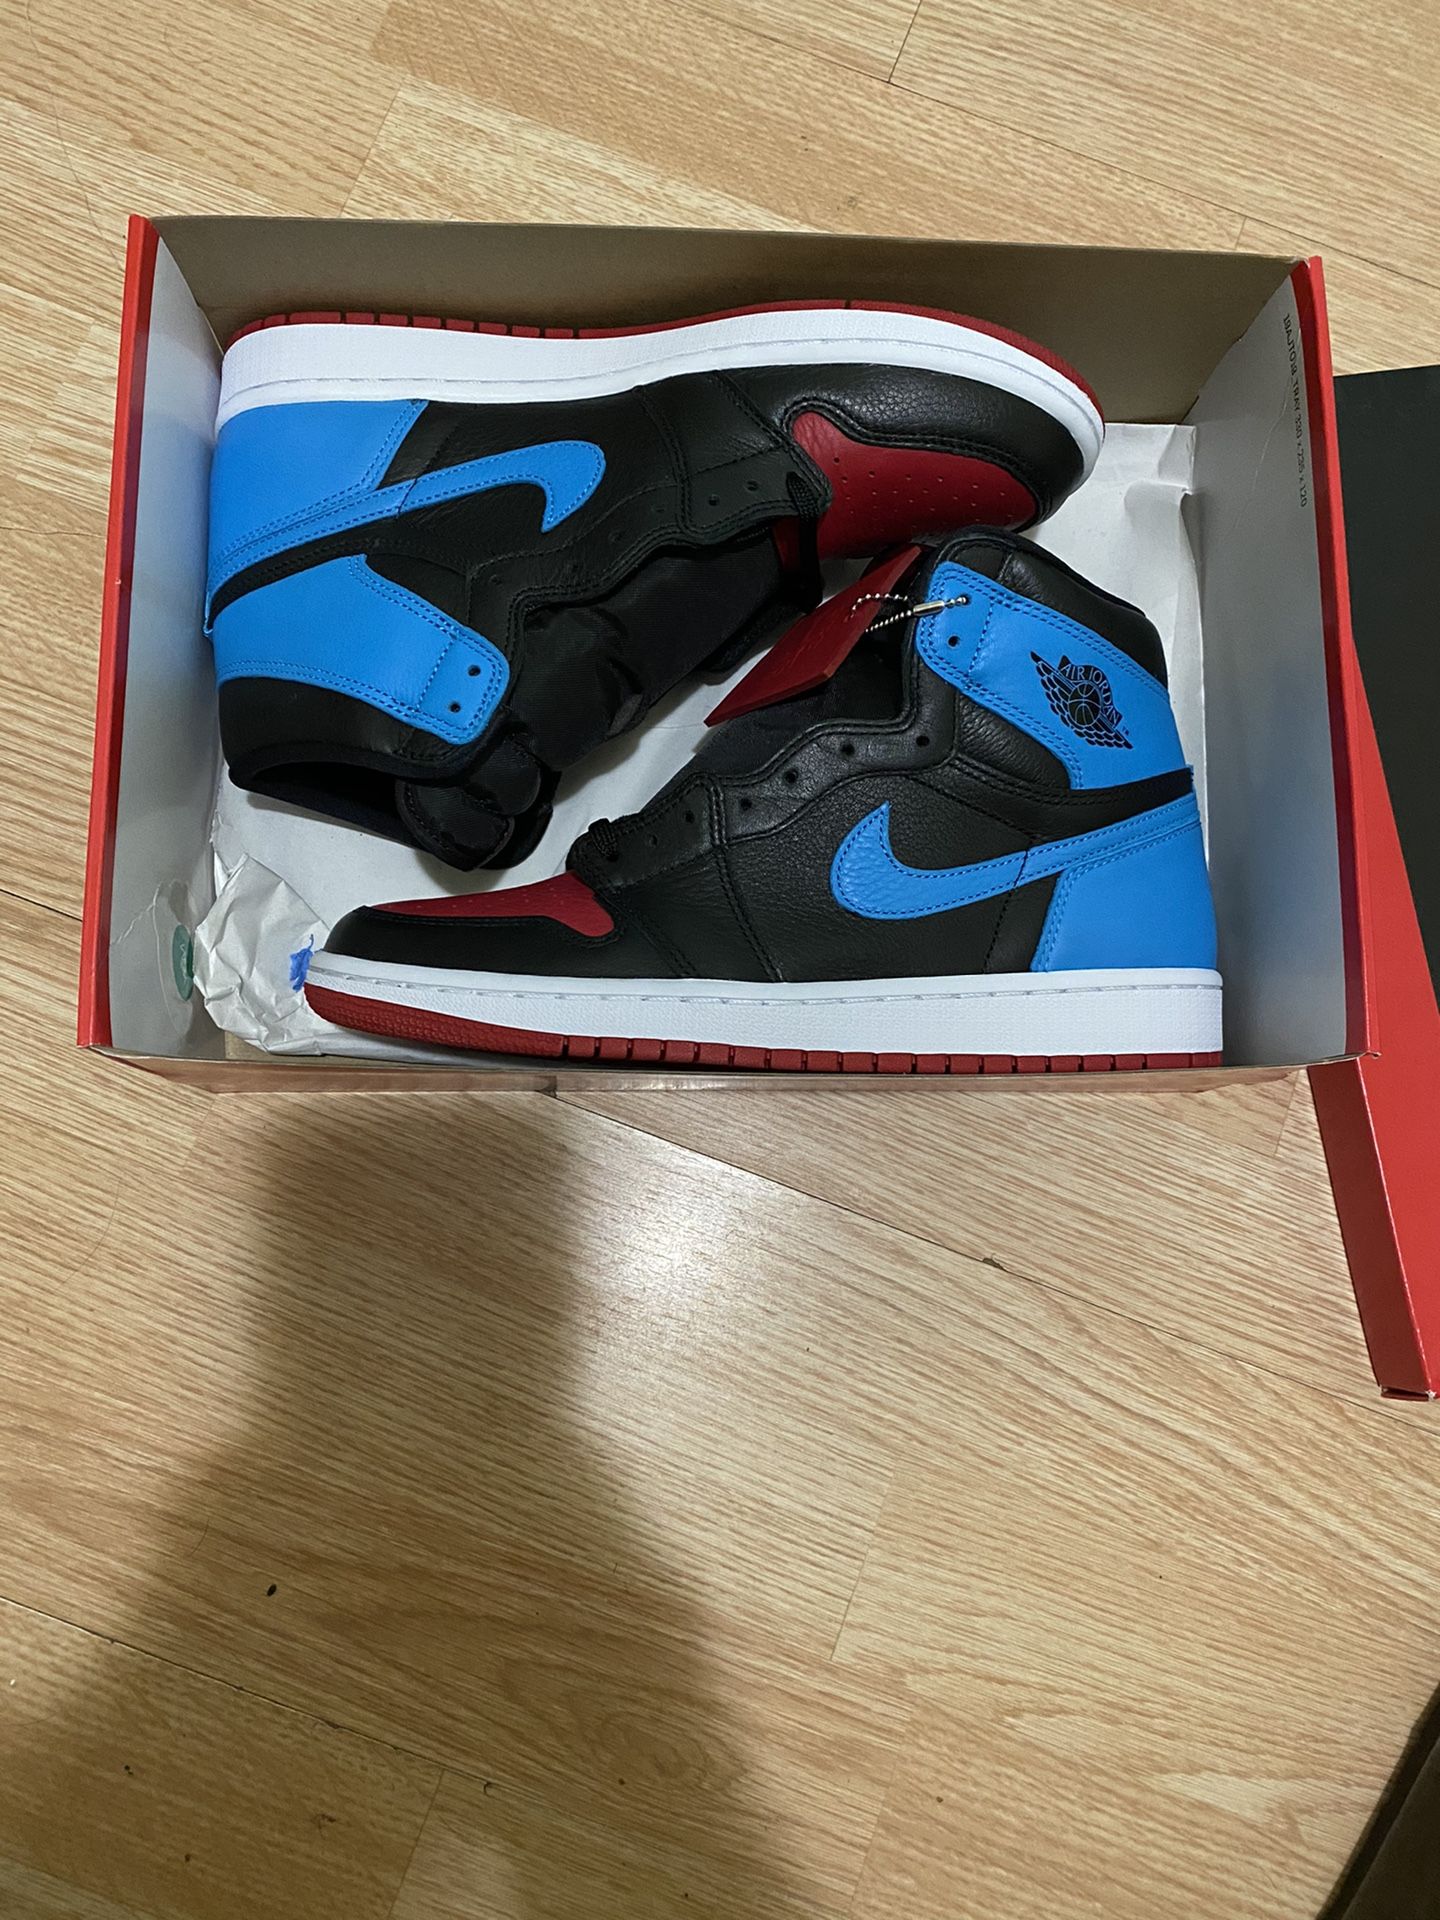 Jordan 1 unc to chicago DS size 10 women/ 8.5 mens from snkrs!